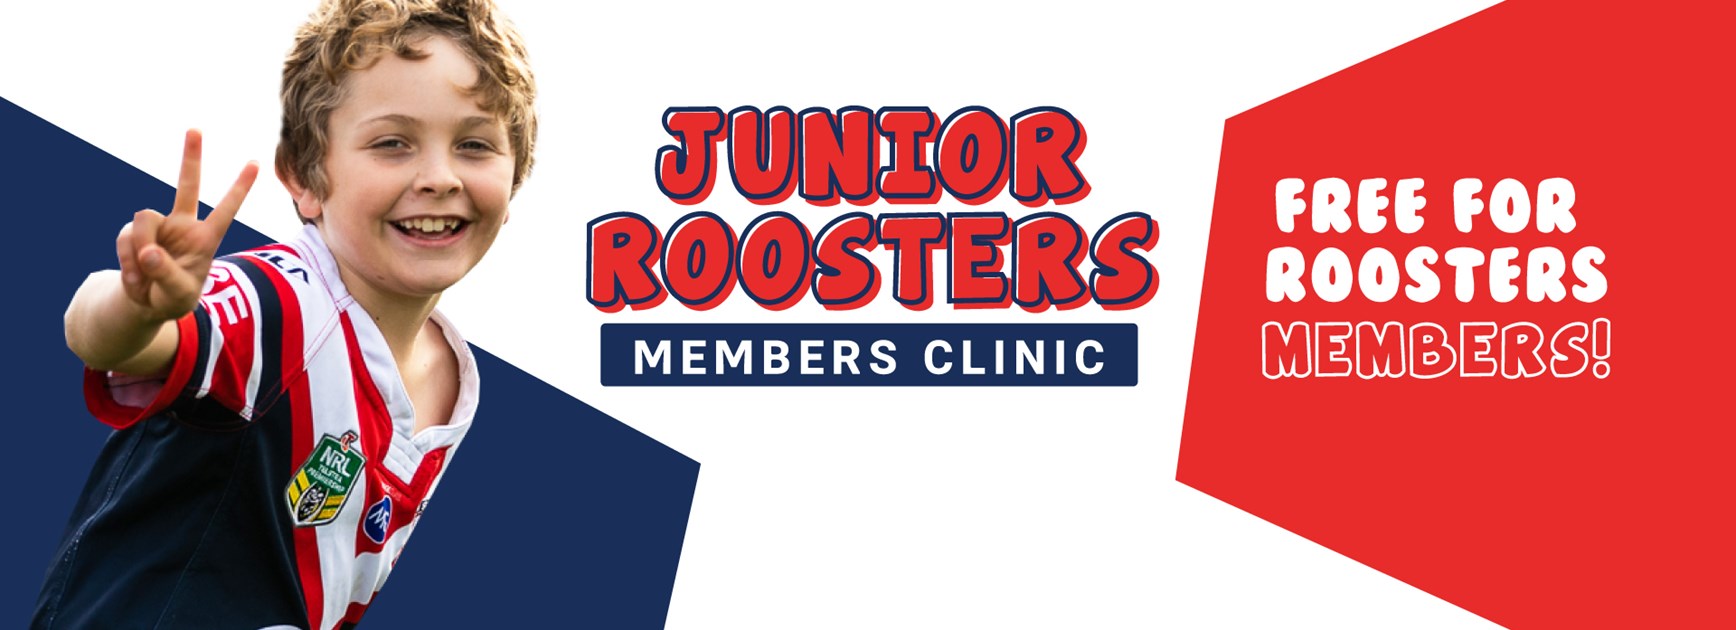 Sign Up for the Junior Roosters Members Clinic this June!